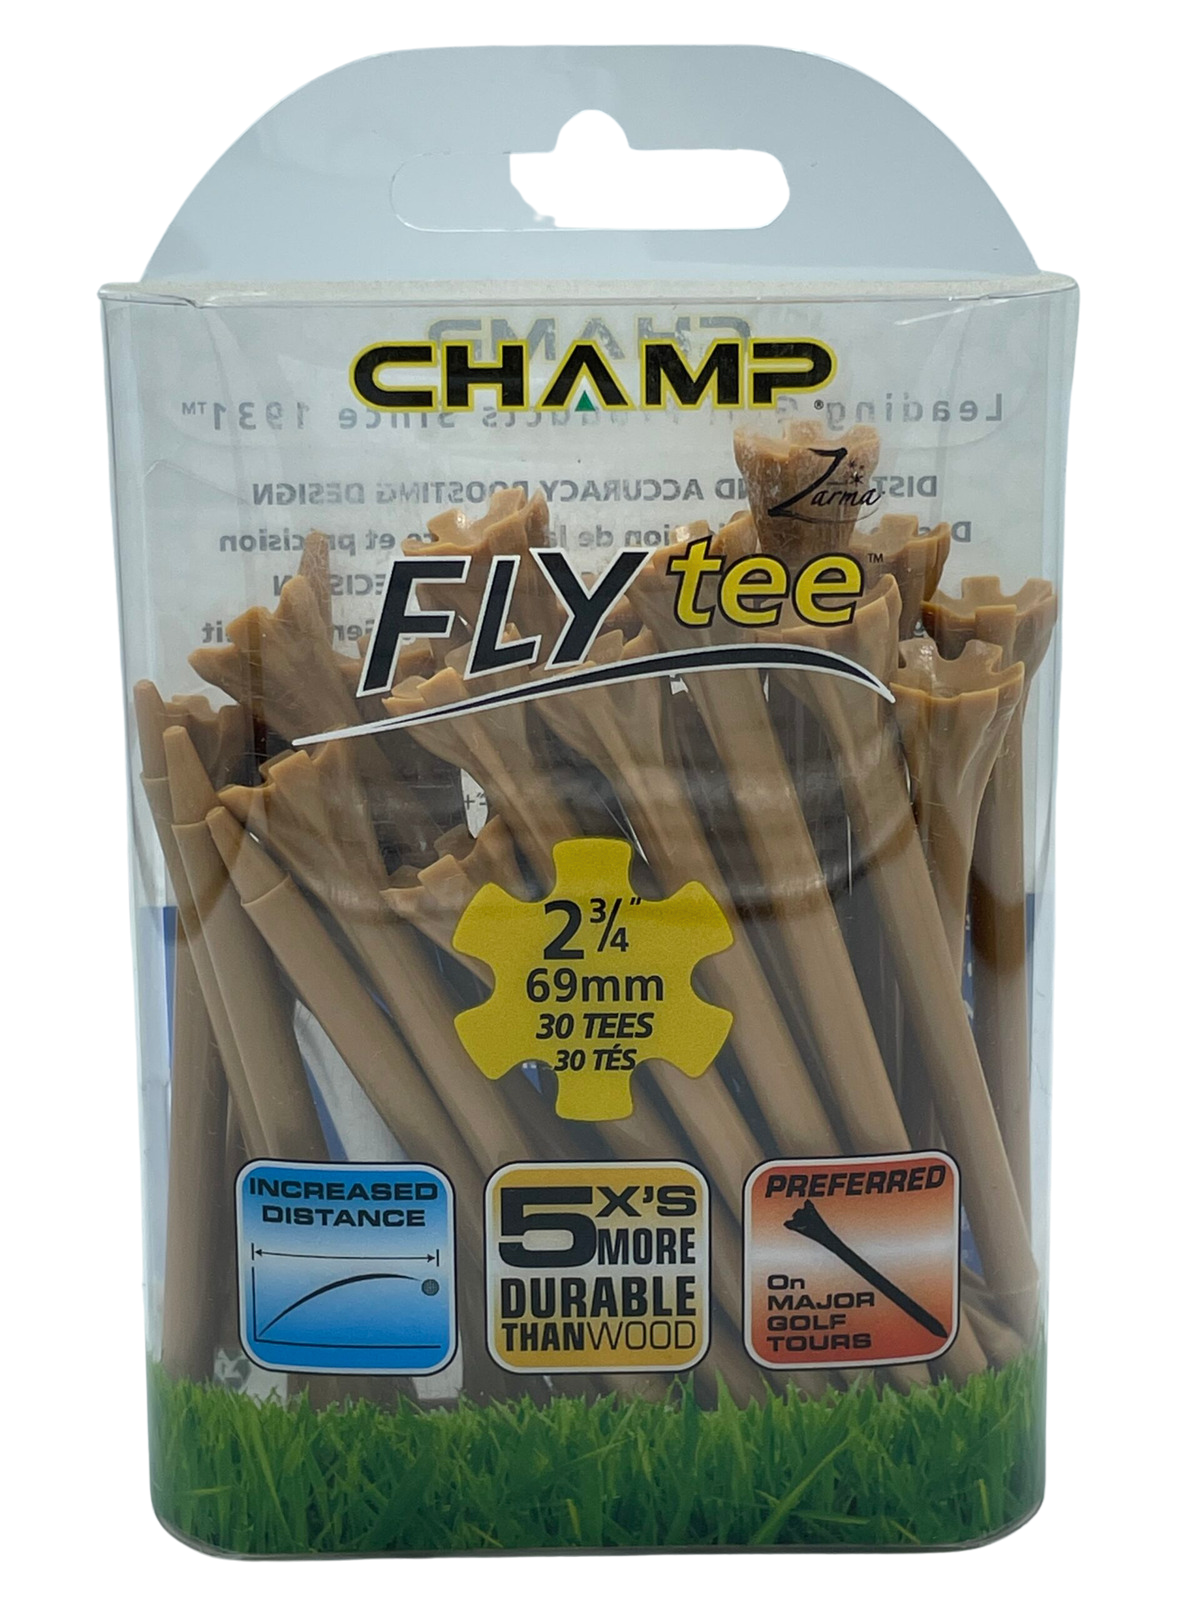 2 3/4" Natural Champ Fly Tees -30 Pack